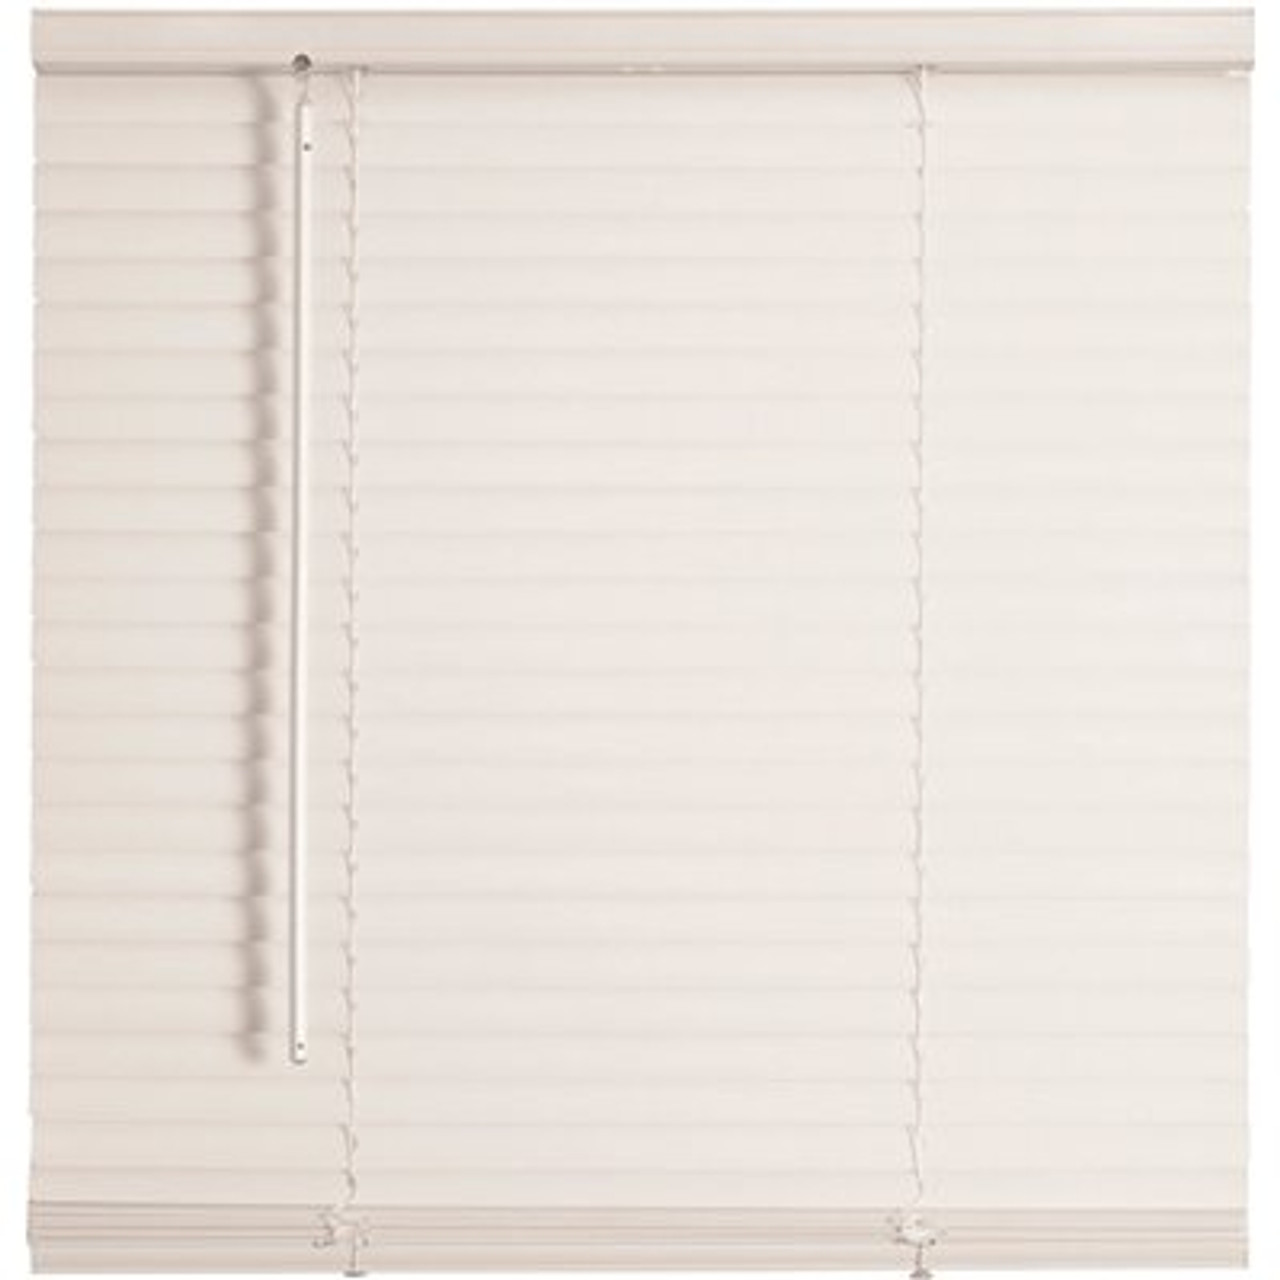 Champion Trutouch White Cordless Light Filtering Vinyl Mini Blinds With 1 In. Slats 31 In. W X 48 In. L